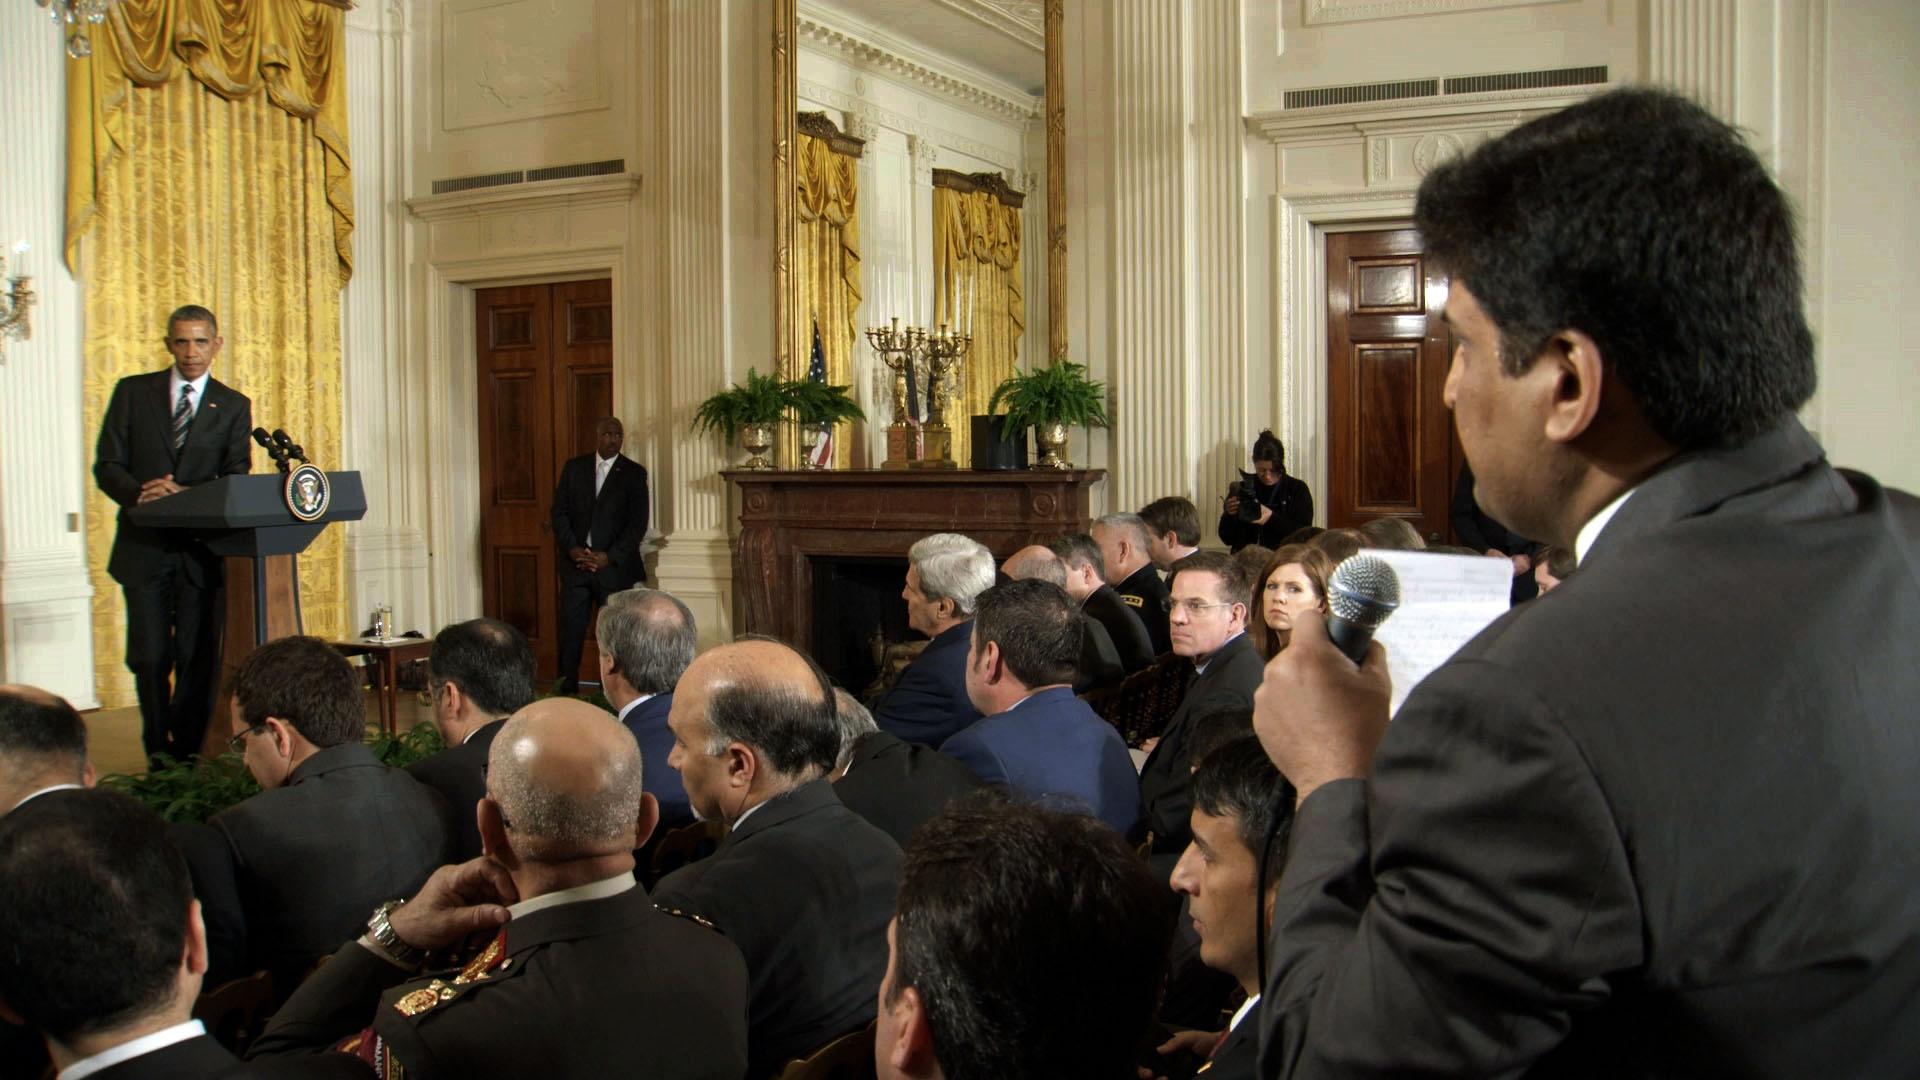 News reporter asks President Obama a question in the East Room of the White House.